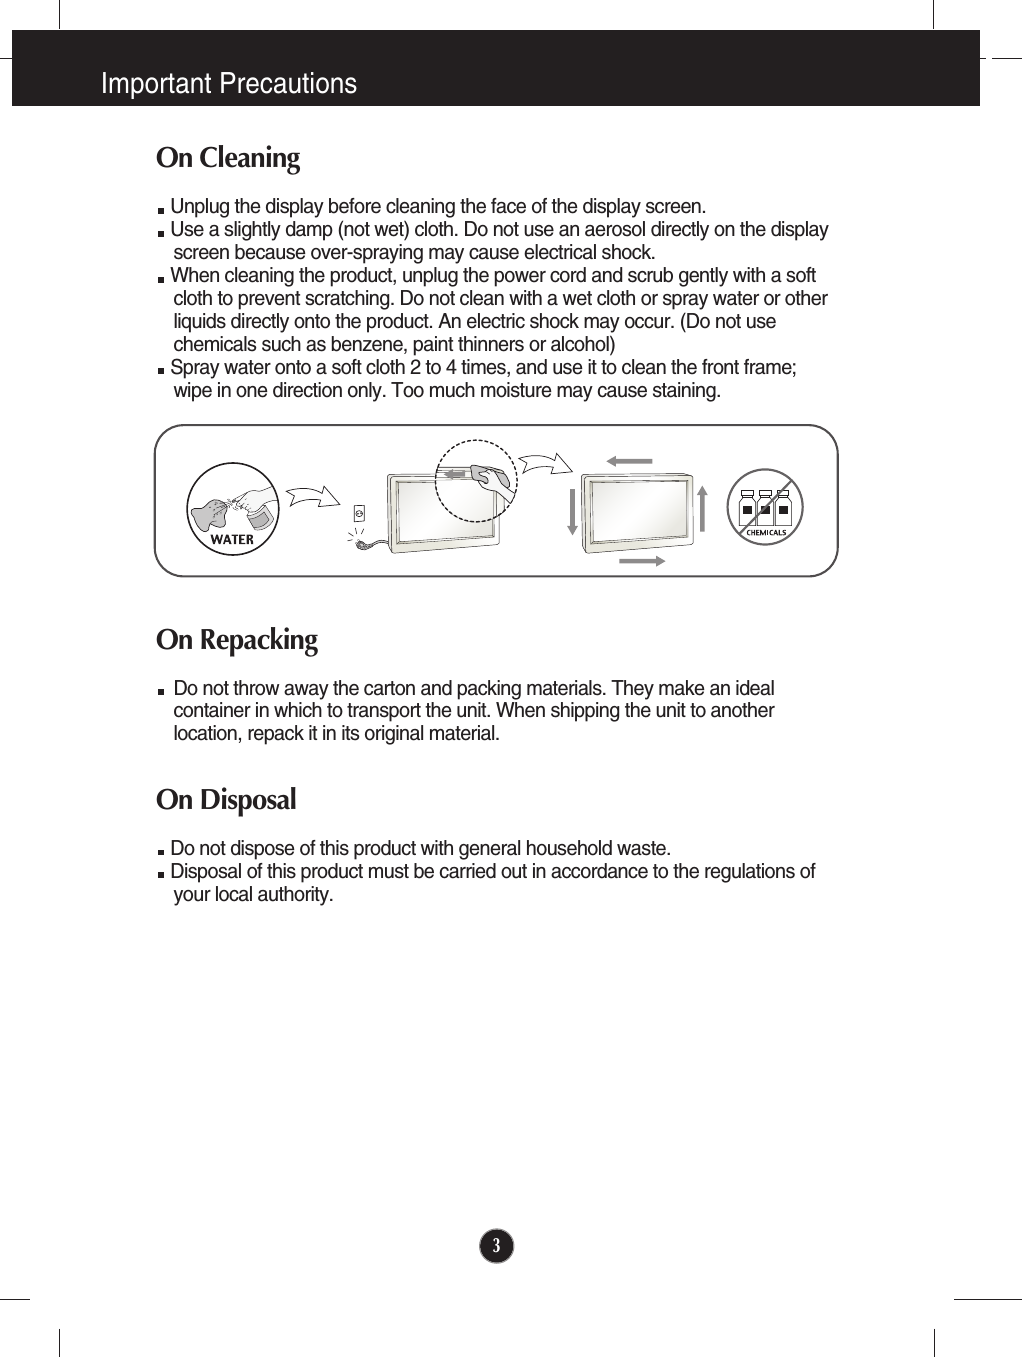 Important Precautions3On CleaningUnplug the display before cleaning the face of the display screen.Use a slightly damp (not wet) cloth. Do not use an aerosol directly on the displayscreen because over-spraying may cause electrical shock.When cleaning the product, unplug the power cord and scrub gently with a softcloth to prevent scratching. Do not clean with a wet cloth or spray water or otherliquids directly onto the product. An electric shock may occur. (Do not usechemicals such as benzene, paint thinners or alcohol) Spray water onto a soft cloth 2 to 4 times, and use it to clean the front frame;wipe in one direction only. Too much moisture may cause staining.  On RepackingDo not throw away the carton and packing materials. They make an idealcontainer in which to transport the unit. When shipping the unit to anotherlocation, repack it in its original material.On Disposal Do not dispose of this product with general household waste.Disposal of this product must be carried out in accordance to the regulations ofyour local authority.